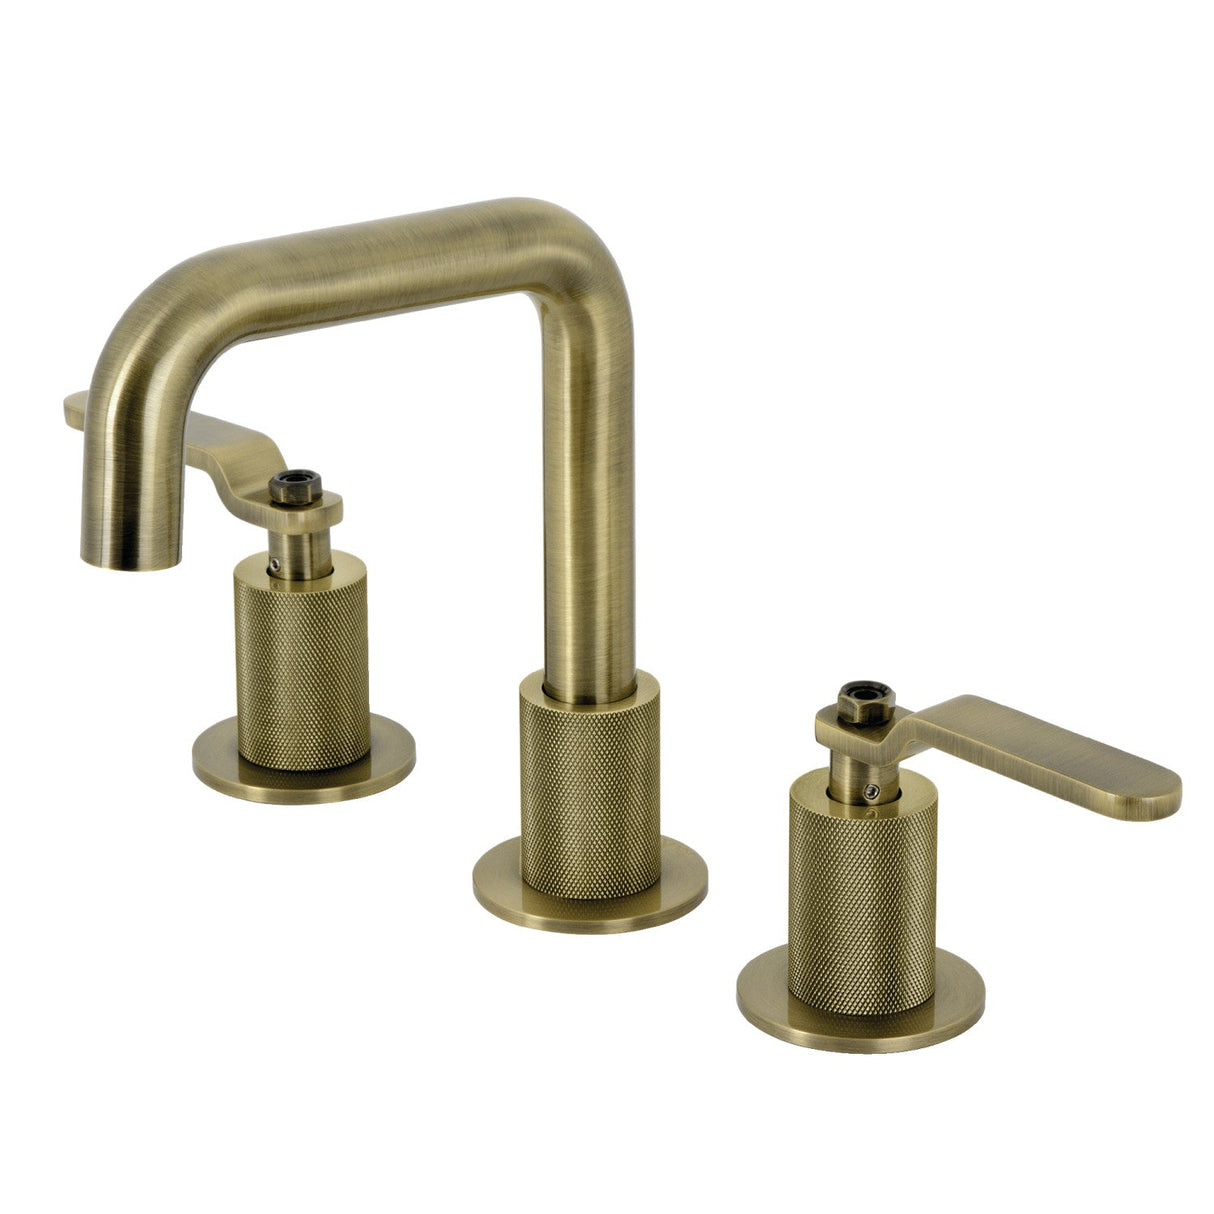 Whitaker KS1413KL Two-Handle 3-Hole Deck Mount Widespread Bathroom Faucet with Push Pop-Up, Antique Brass